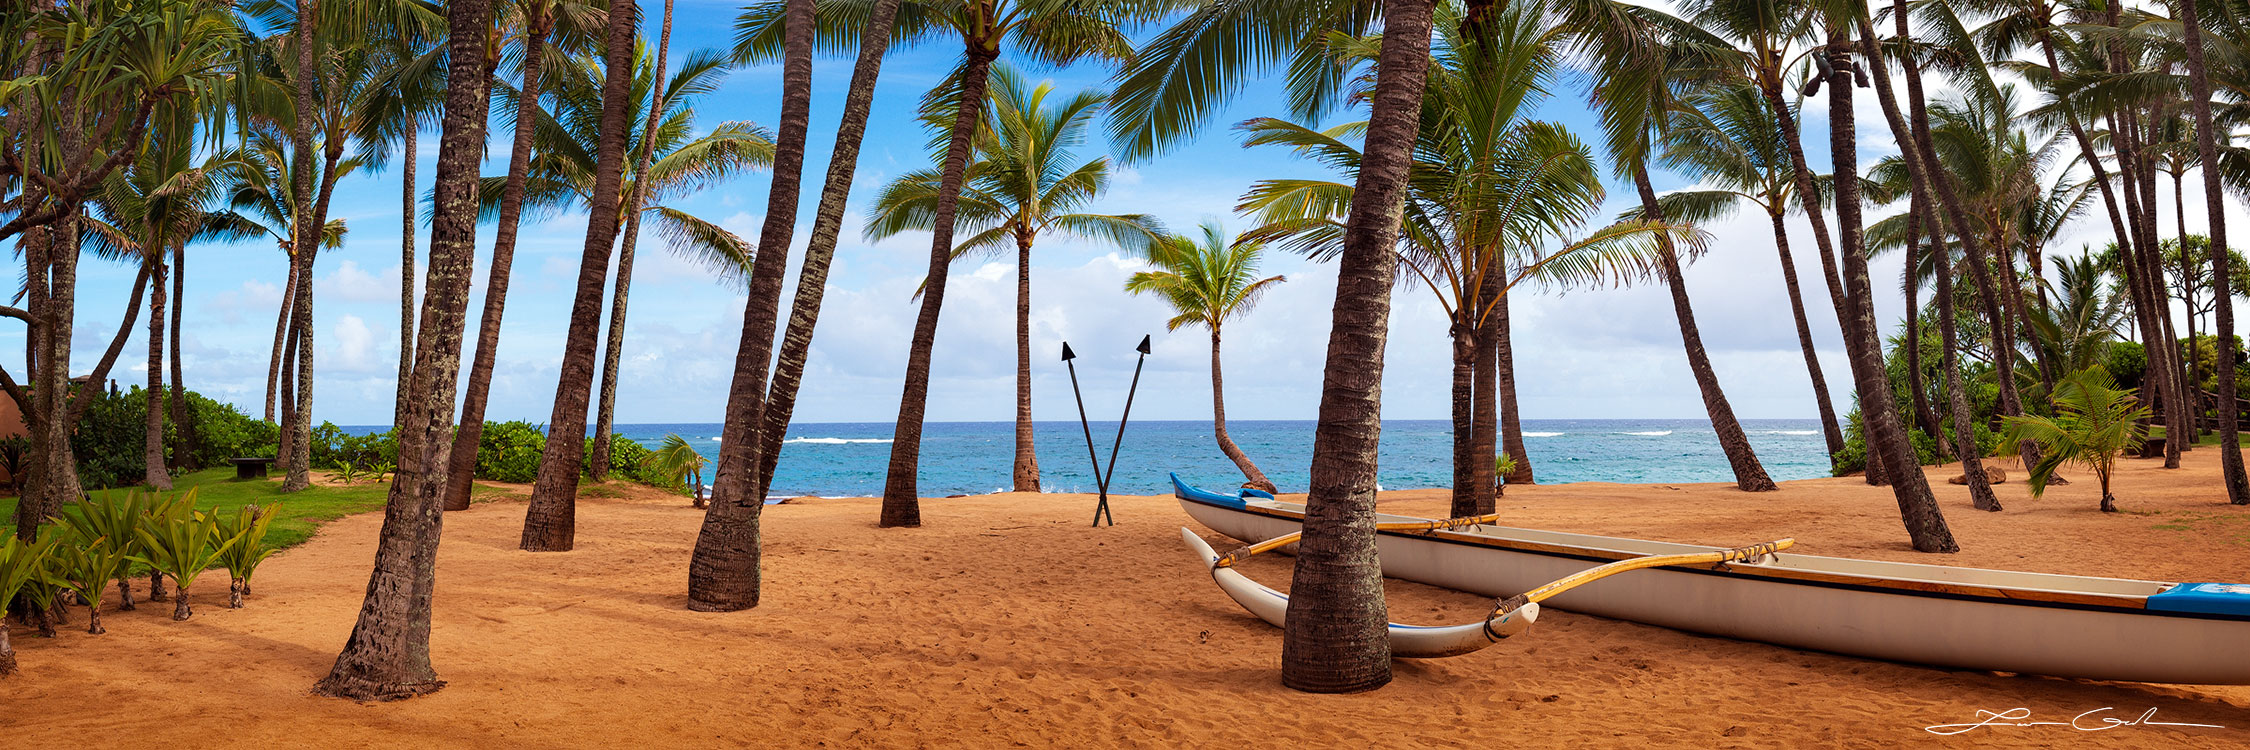 Panoramic view of a serene beach oasis adorned with palm trees, a traditional Hawaiian canoe, and tiki torches, offering a glimpse of paradise - Gintchin Fine Art.